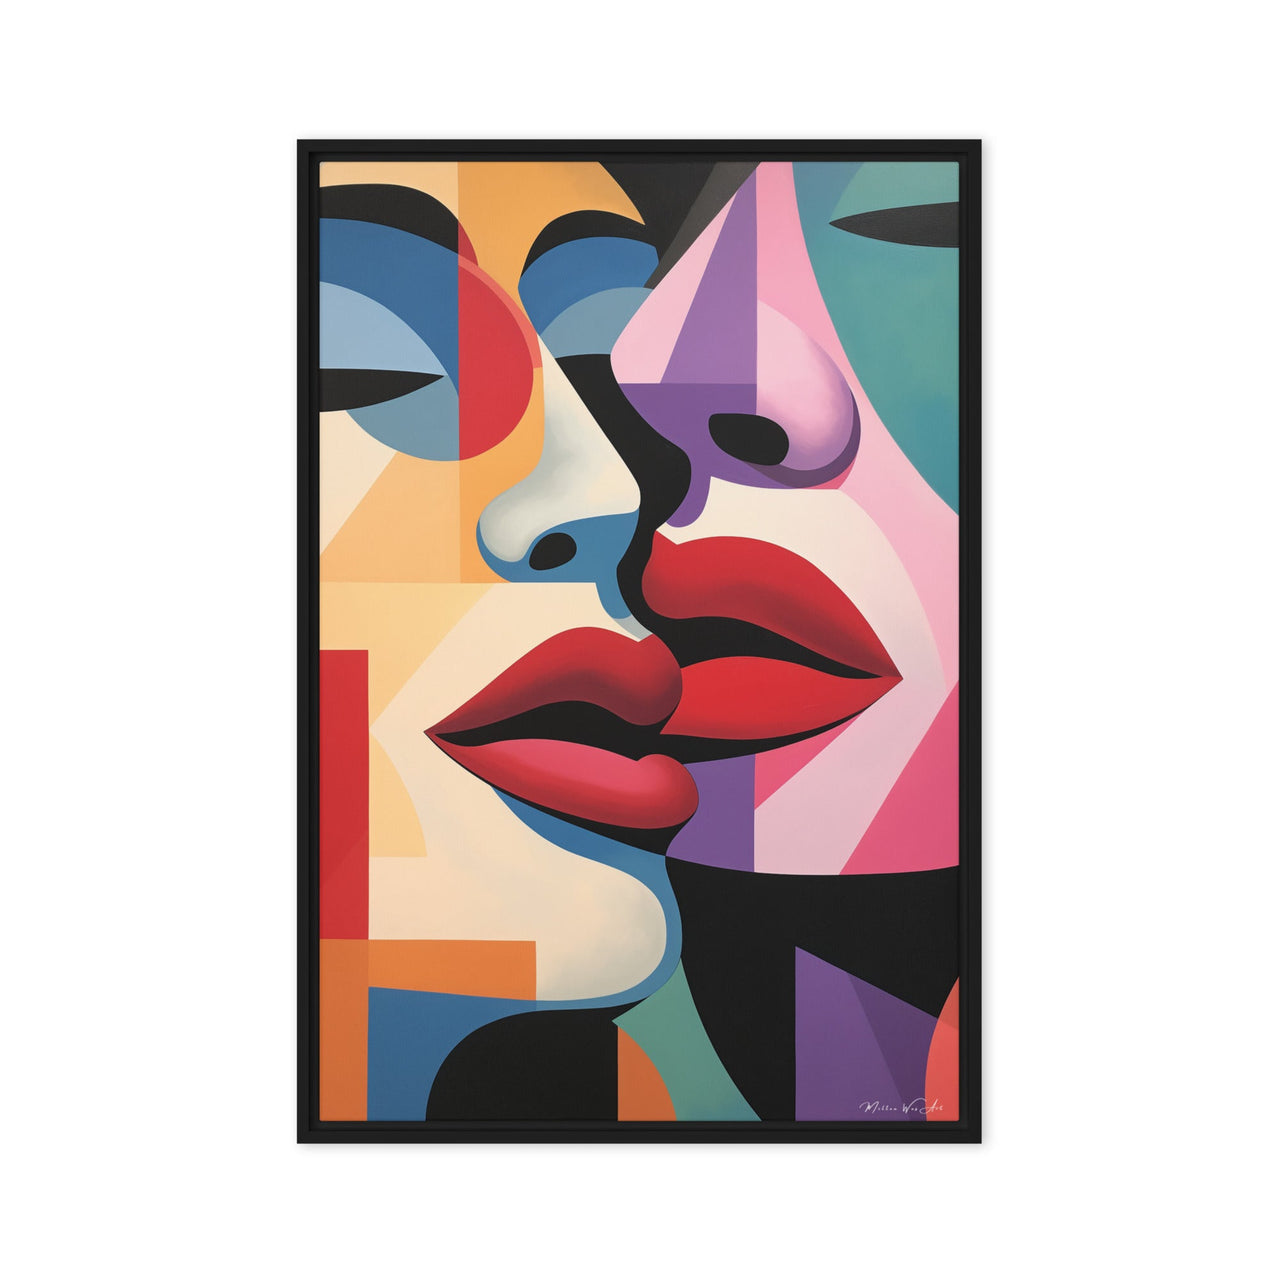 Milton Wes Art's framed canvas featuring a stylized portrayal of abstract faces with bold red lips and contrasting shapes, from the Harlem-based online retailer miltonwesart.com